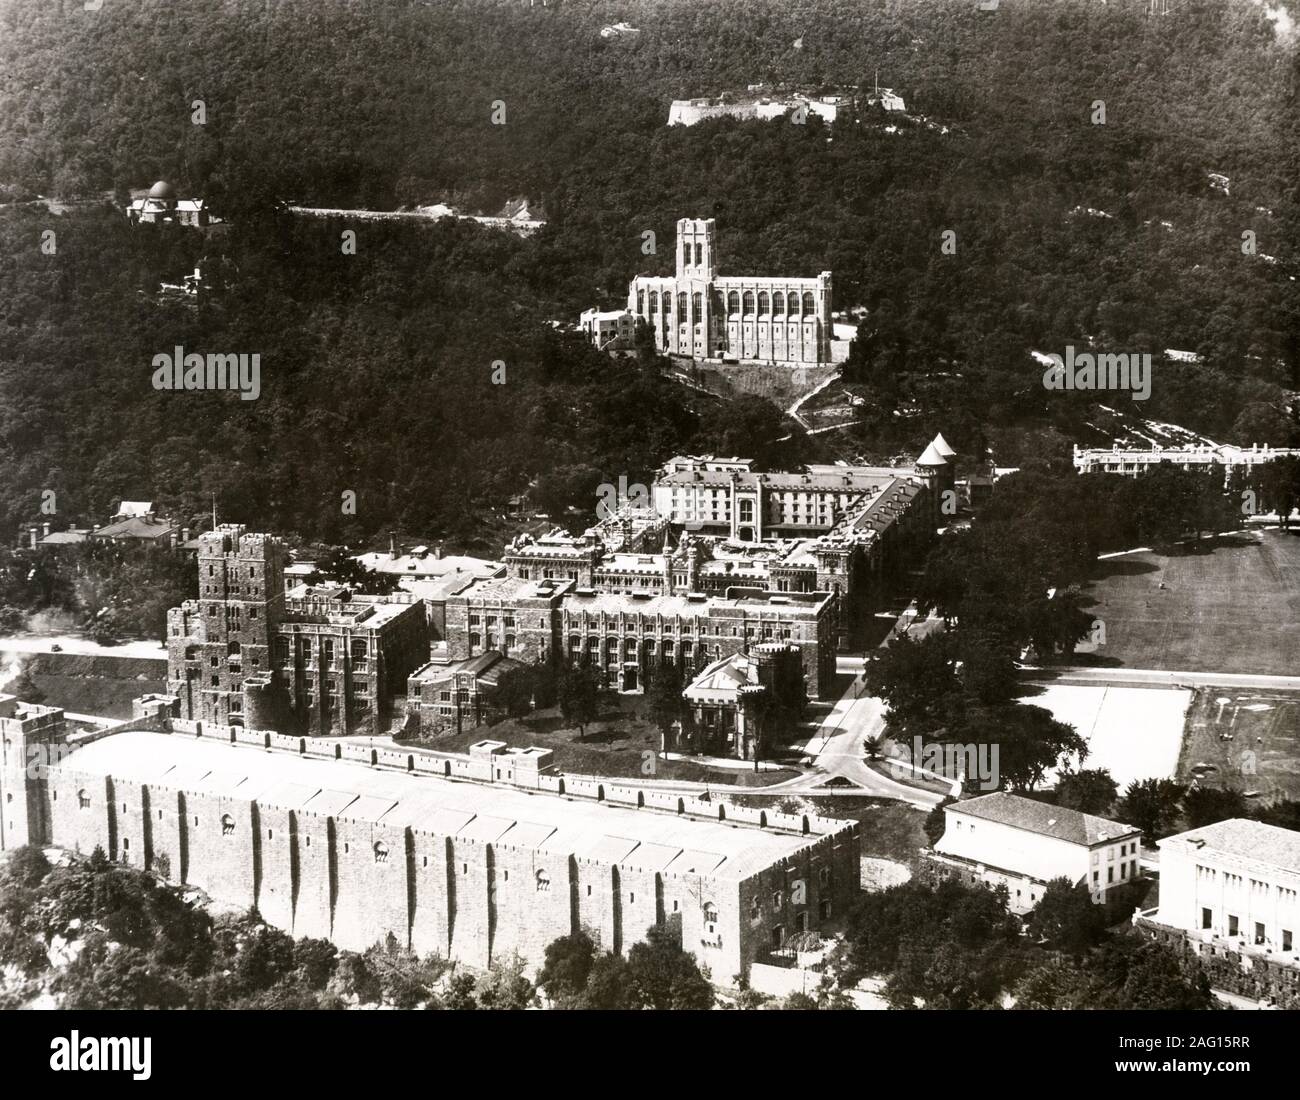 Early 20th century vintage press photograph - US military academy at ...